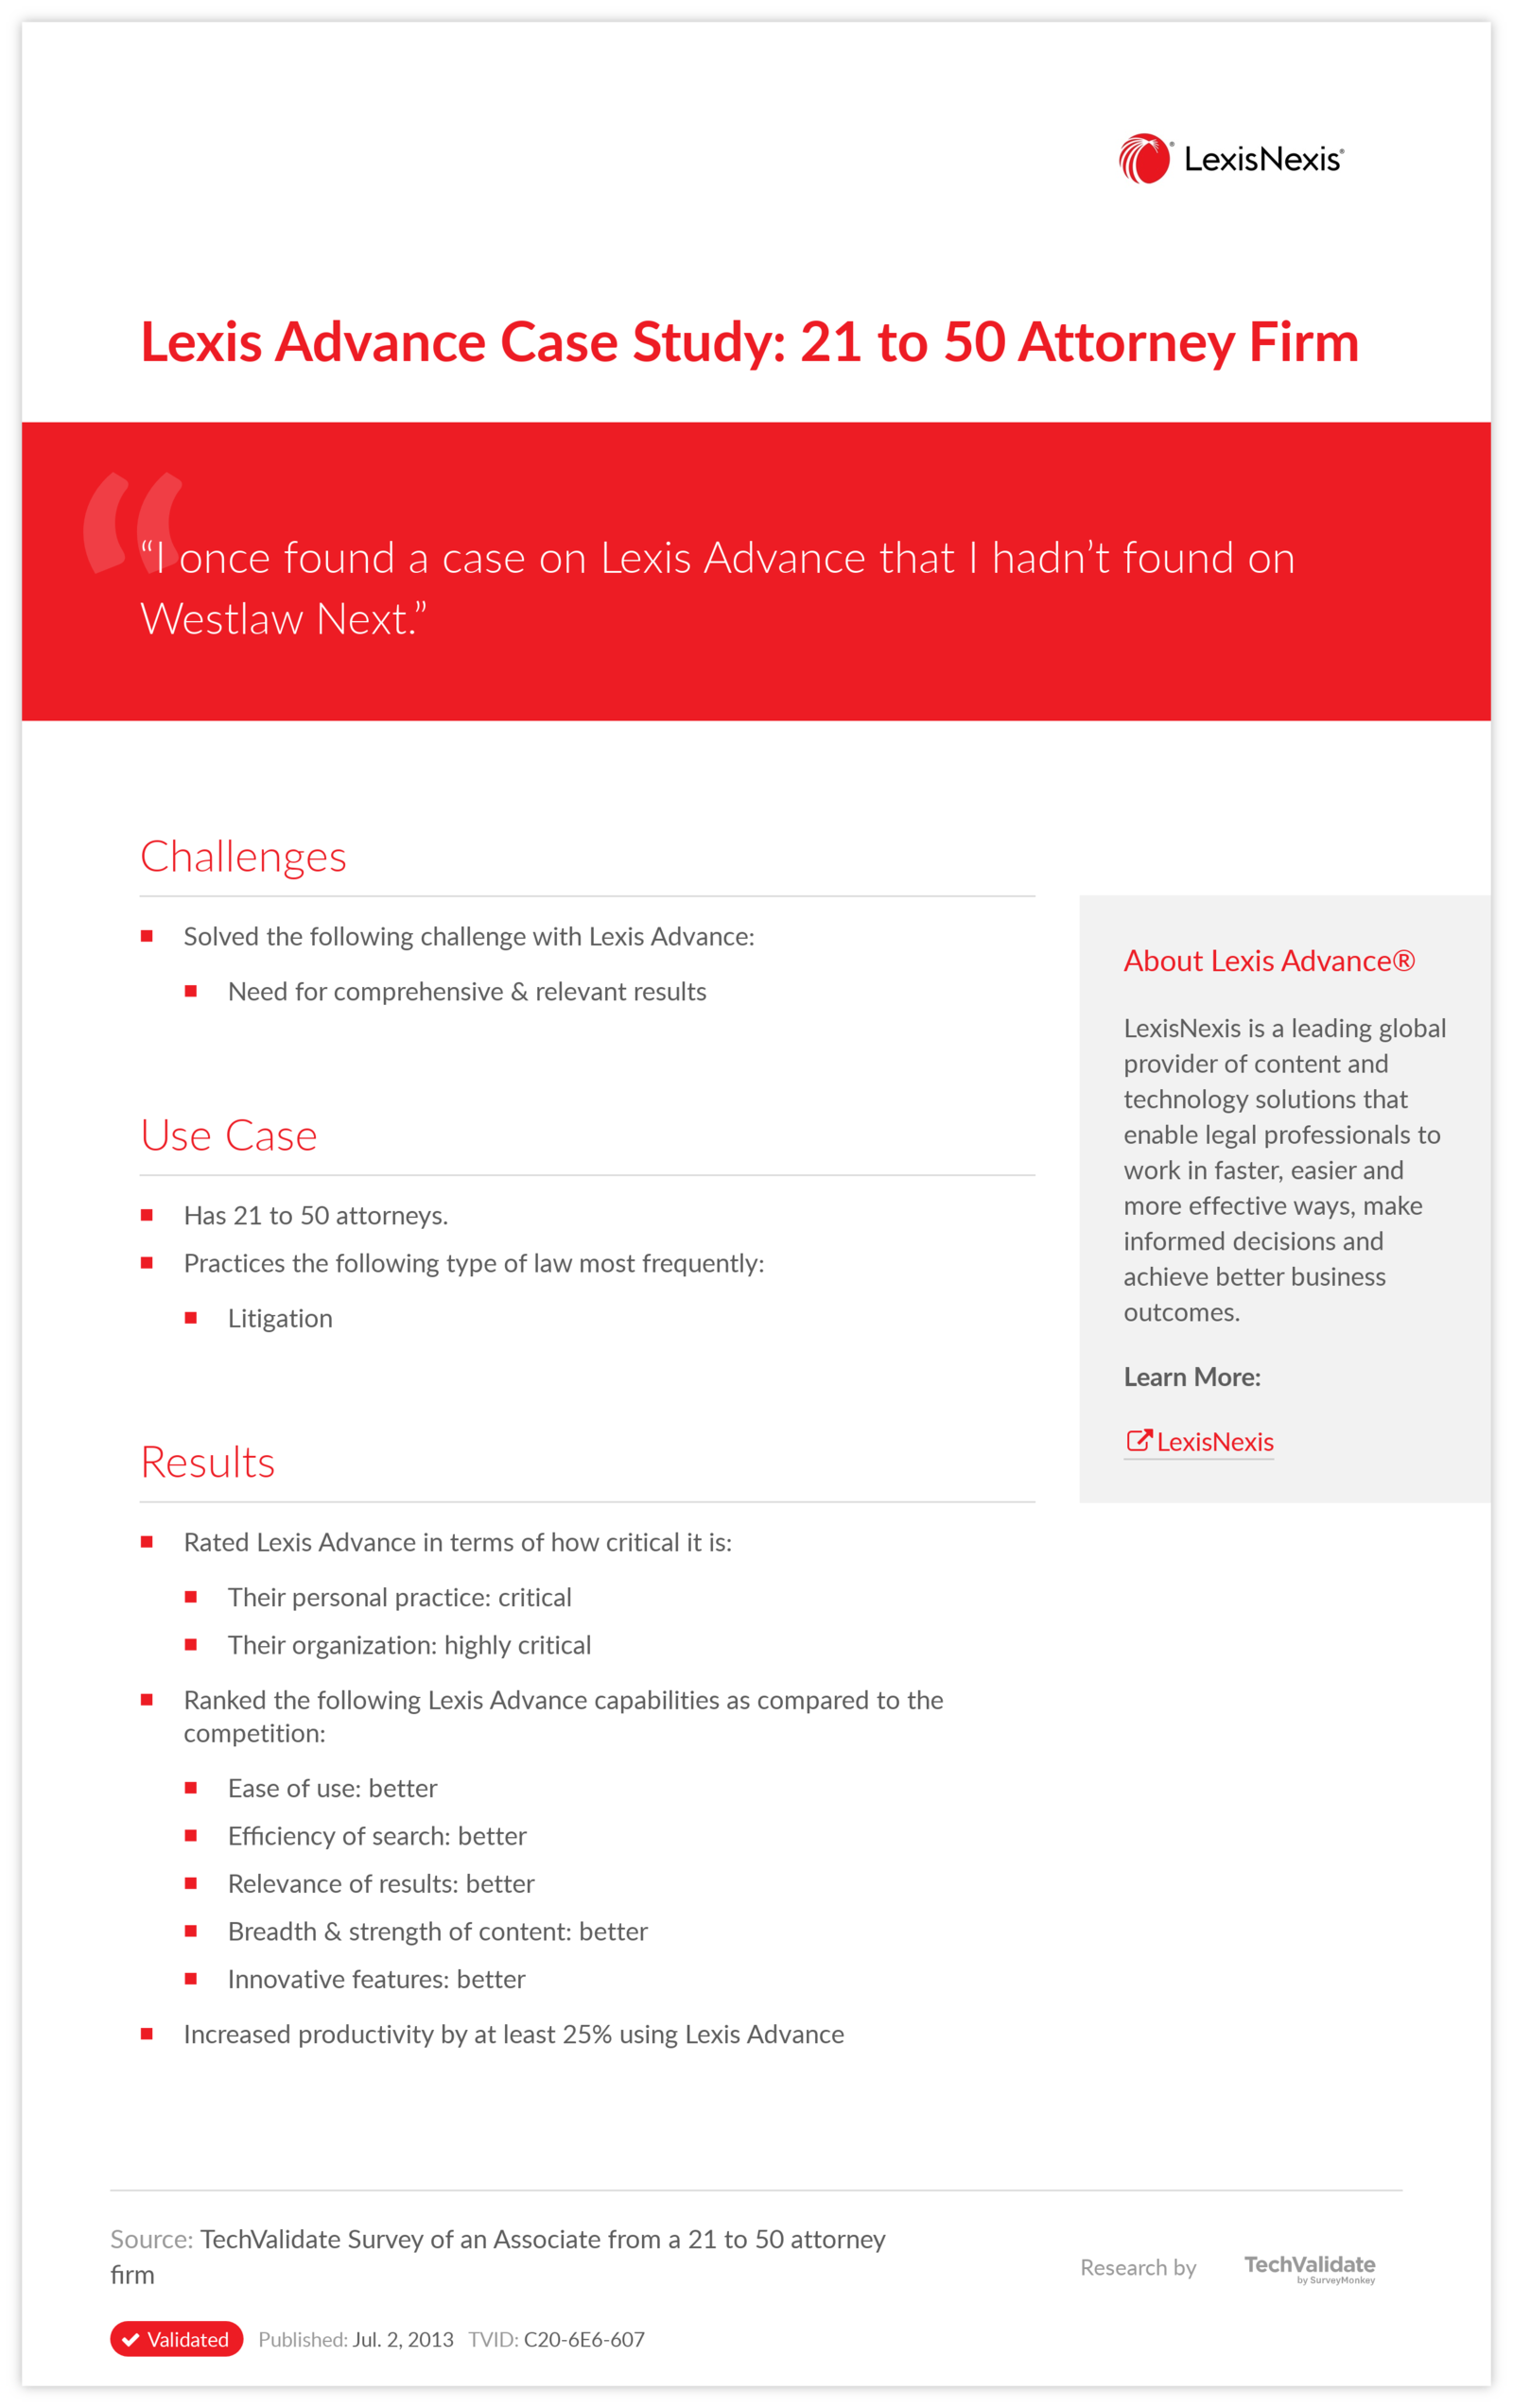 Lexis Advance Case Study: 21 to 50 Attorney Firm